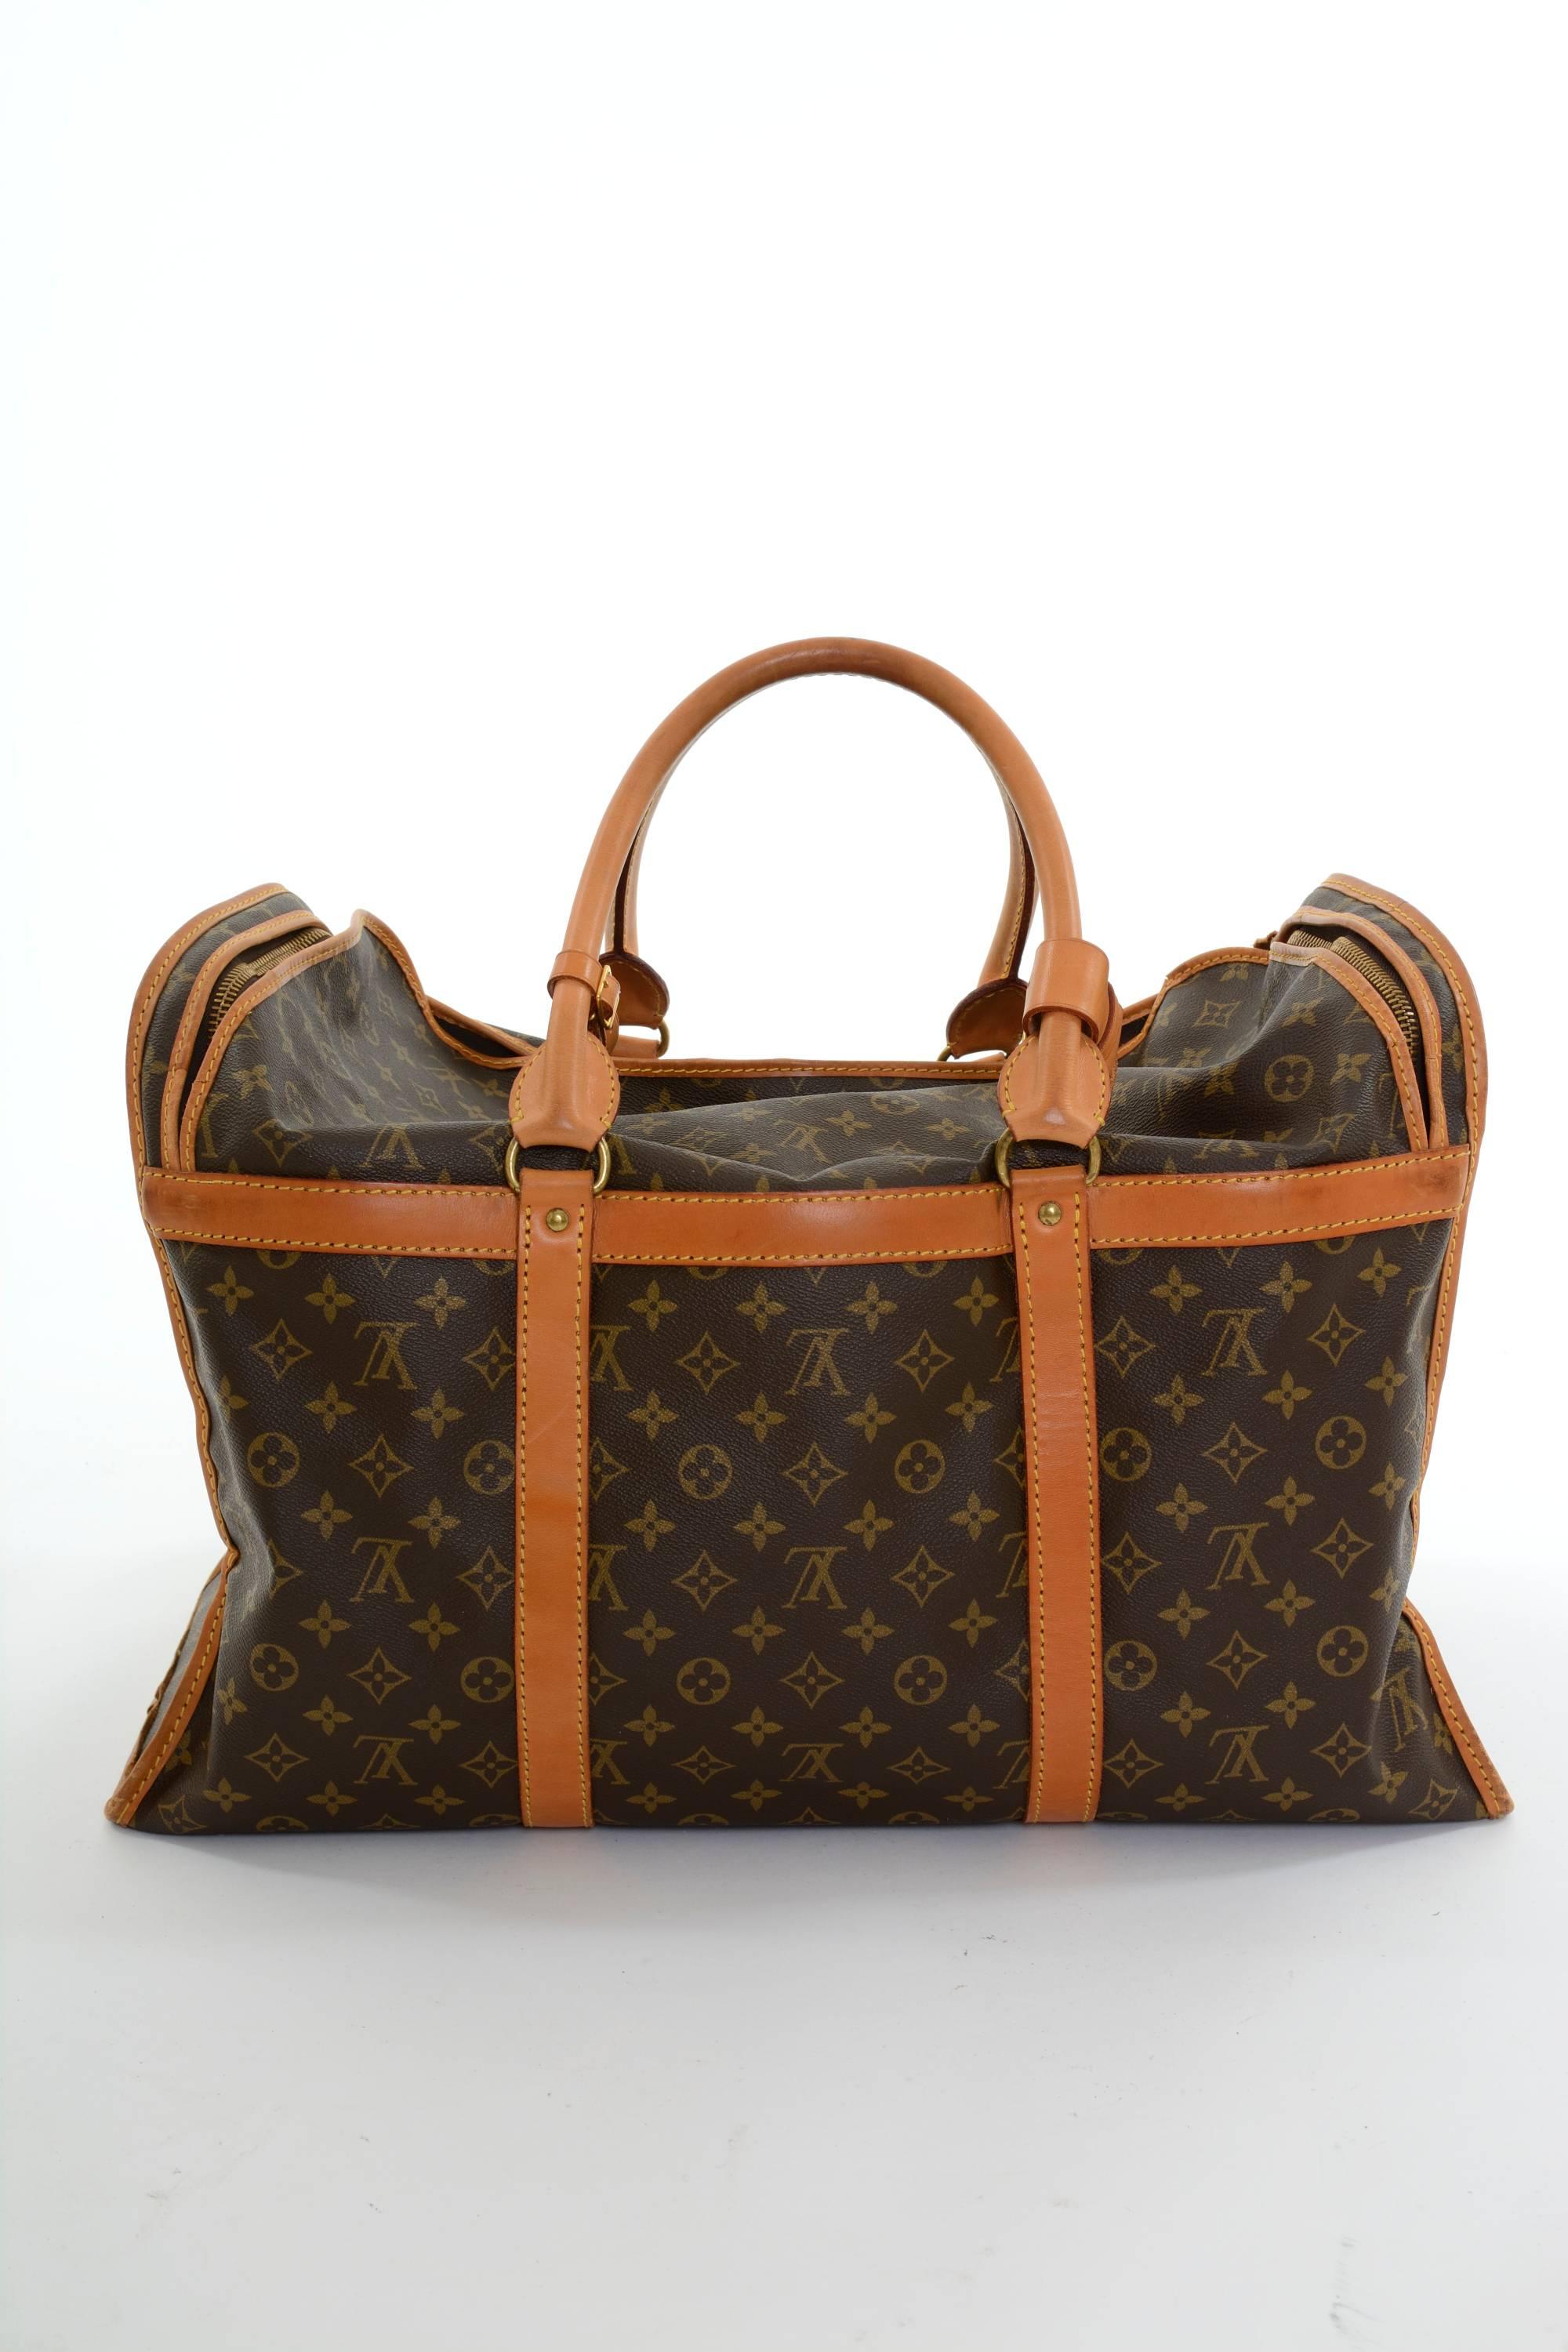 This Louis Vuitton Sac Chaussures 50 is a vintage of the Louis Vuitton bag collection. This spacious large sized version in Monogram canvas and a double brass zipper.   
Made in: France 
Serial Number: 864 VX

Measurements:
20 x 14 x 9 inches 